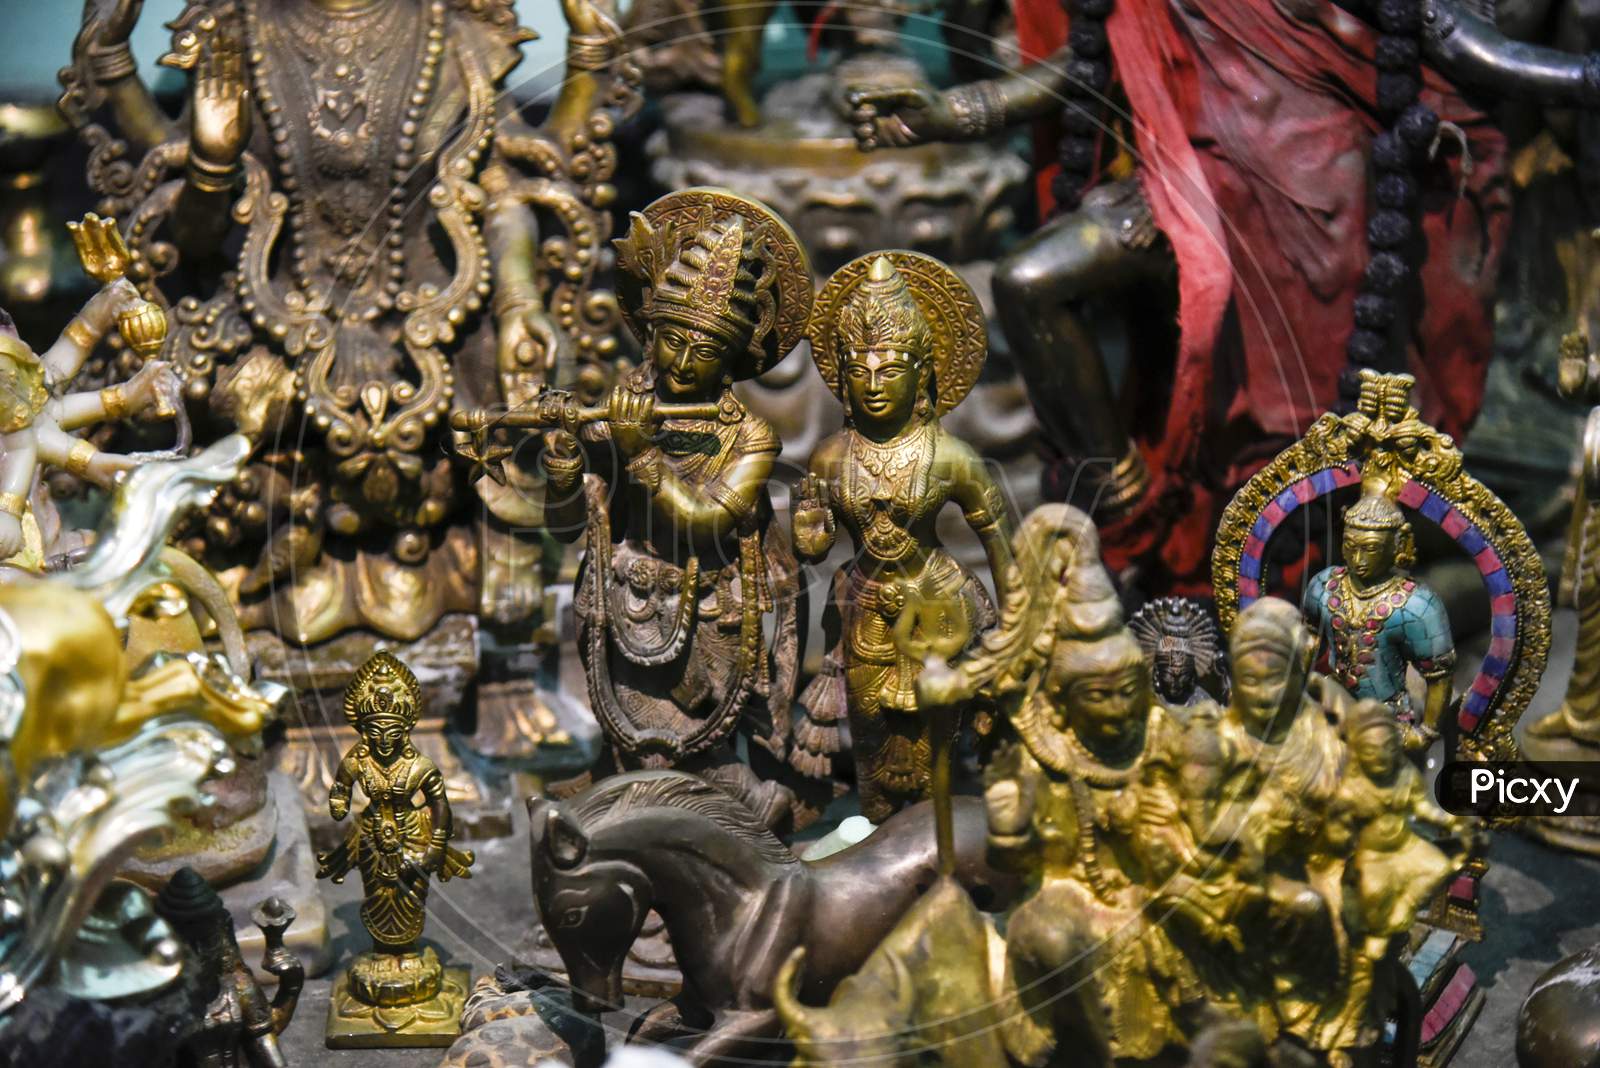 Antique Idols Of Gods And Goddesses Recovered By Police From The River Brahmaputra, In Guwahati